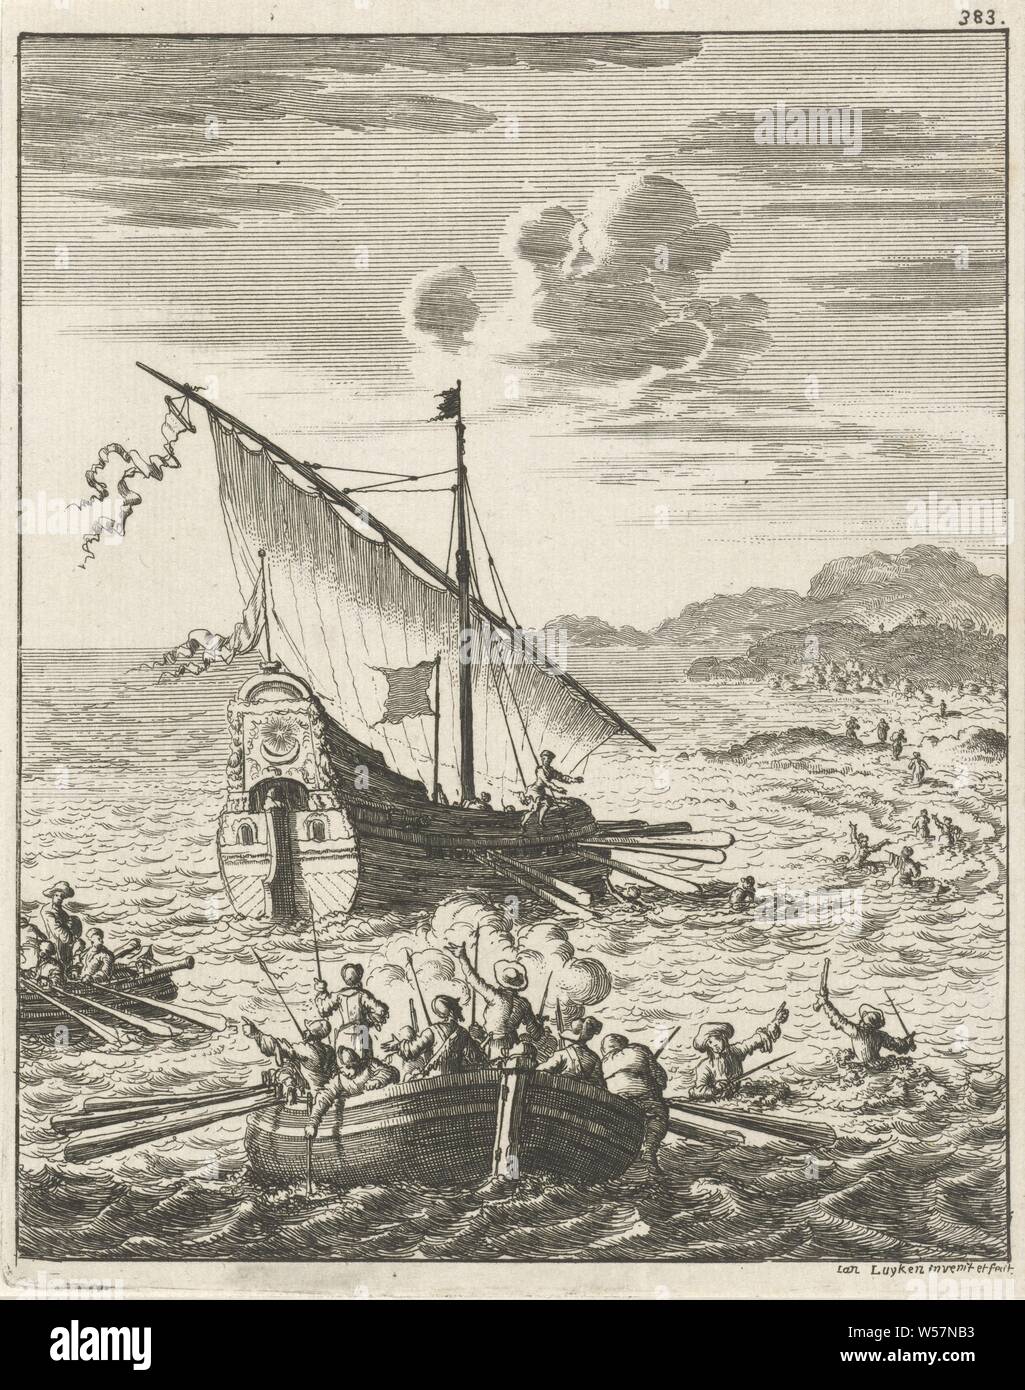 Ship of the writer Jean de Thevenot overpowered by pirates, Print numbered top right: 383, sailing ship, sailing boat, pirate, corsair, buccaneer, Jan Luyken (mentioned on object), Amsterdam, 1681, paper, etching, h 169 mm × w 134 mm Stock Photo